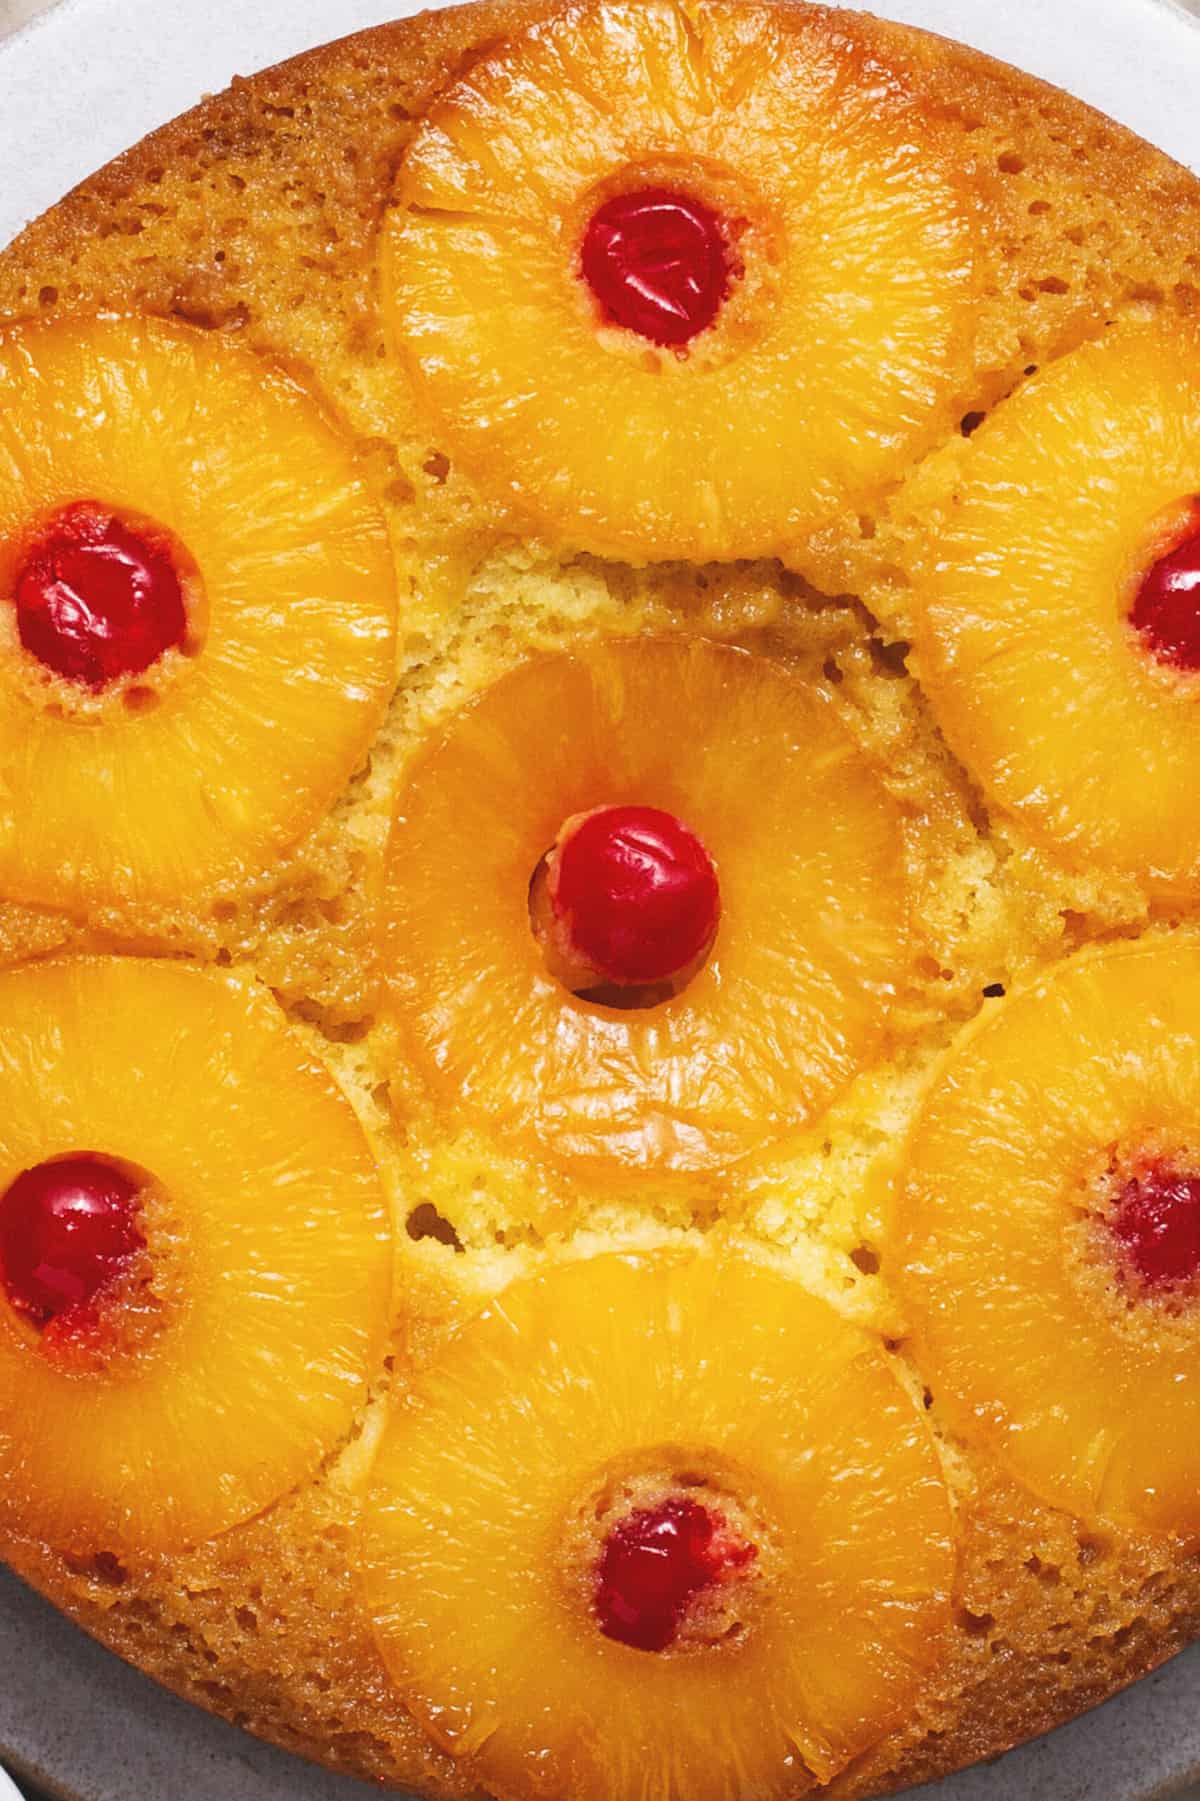 up close baked pineapple rings with cherries on top of cake